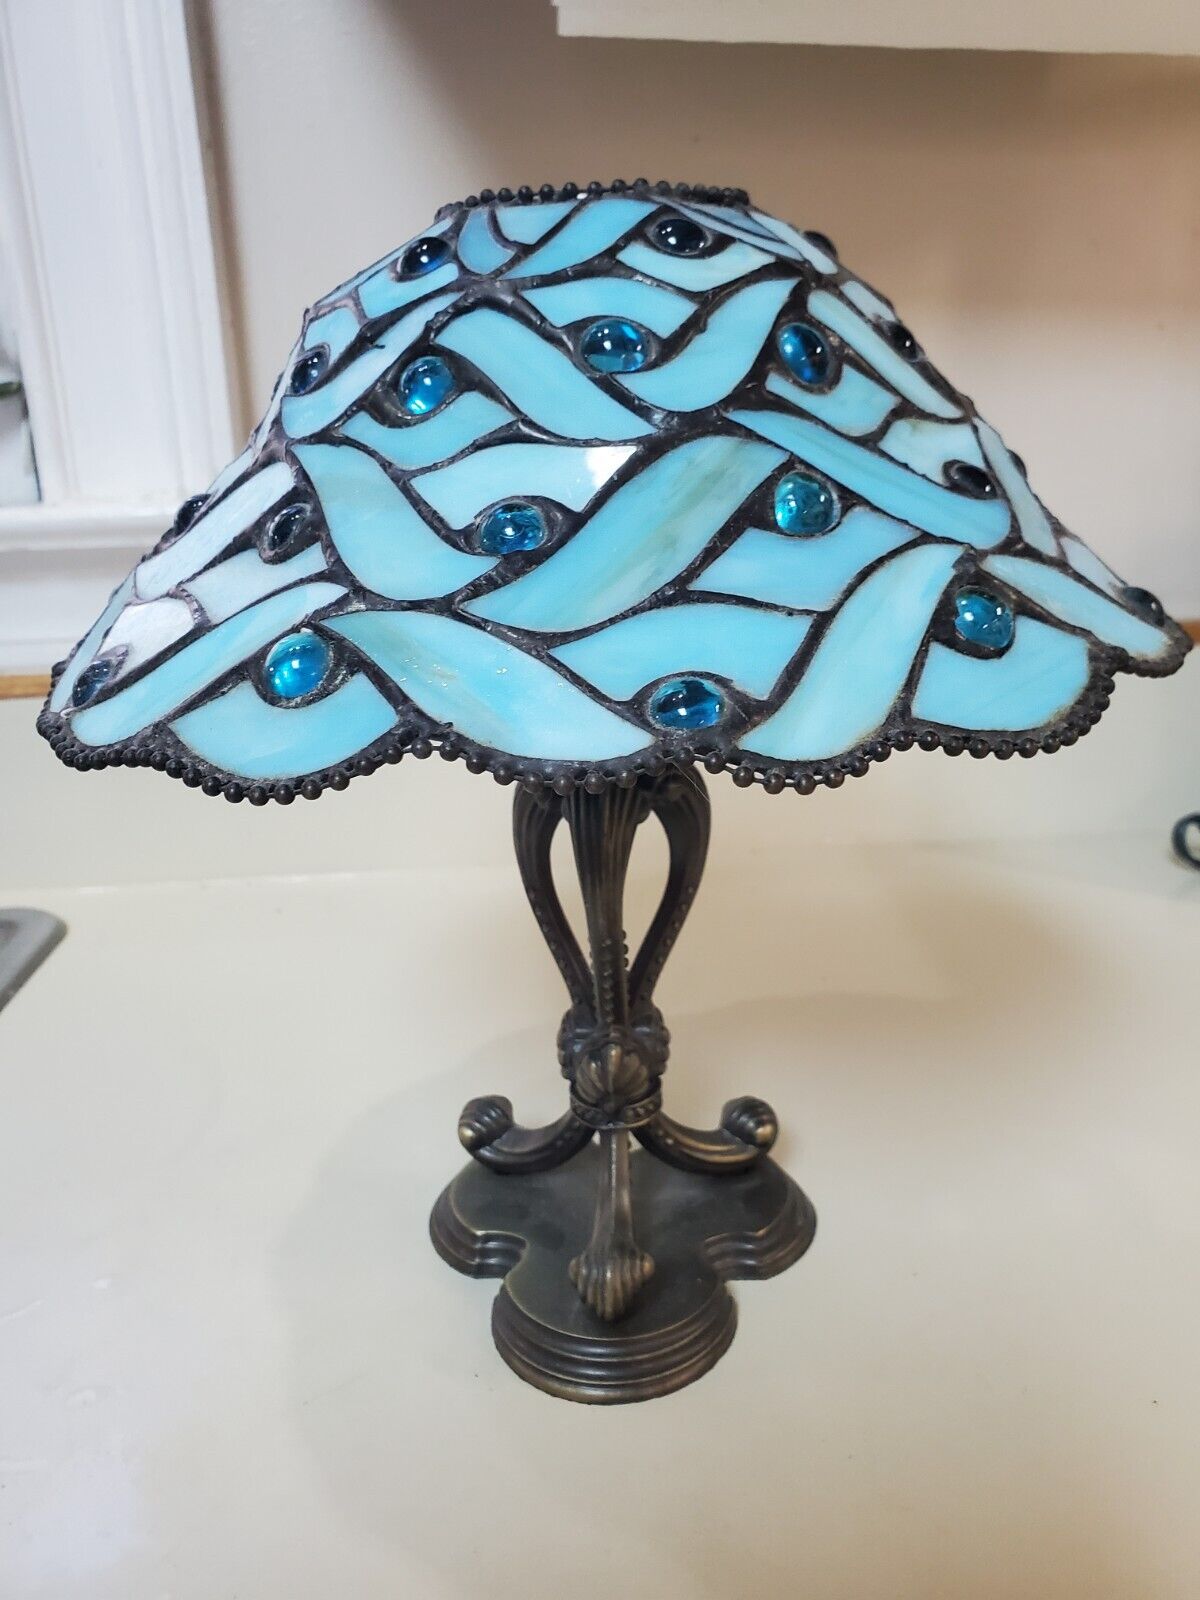 Mosaic/Stained Glass Votive Holder Lamp. Vintage. Really Beautiful.